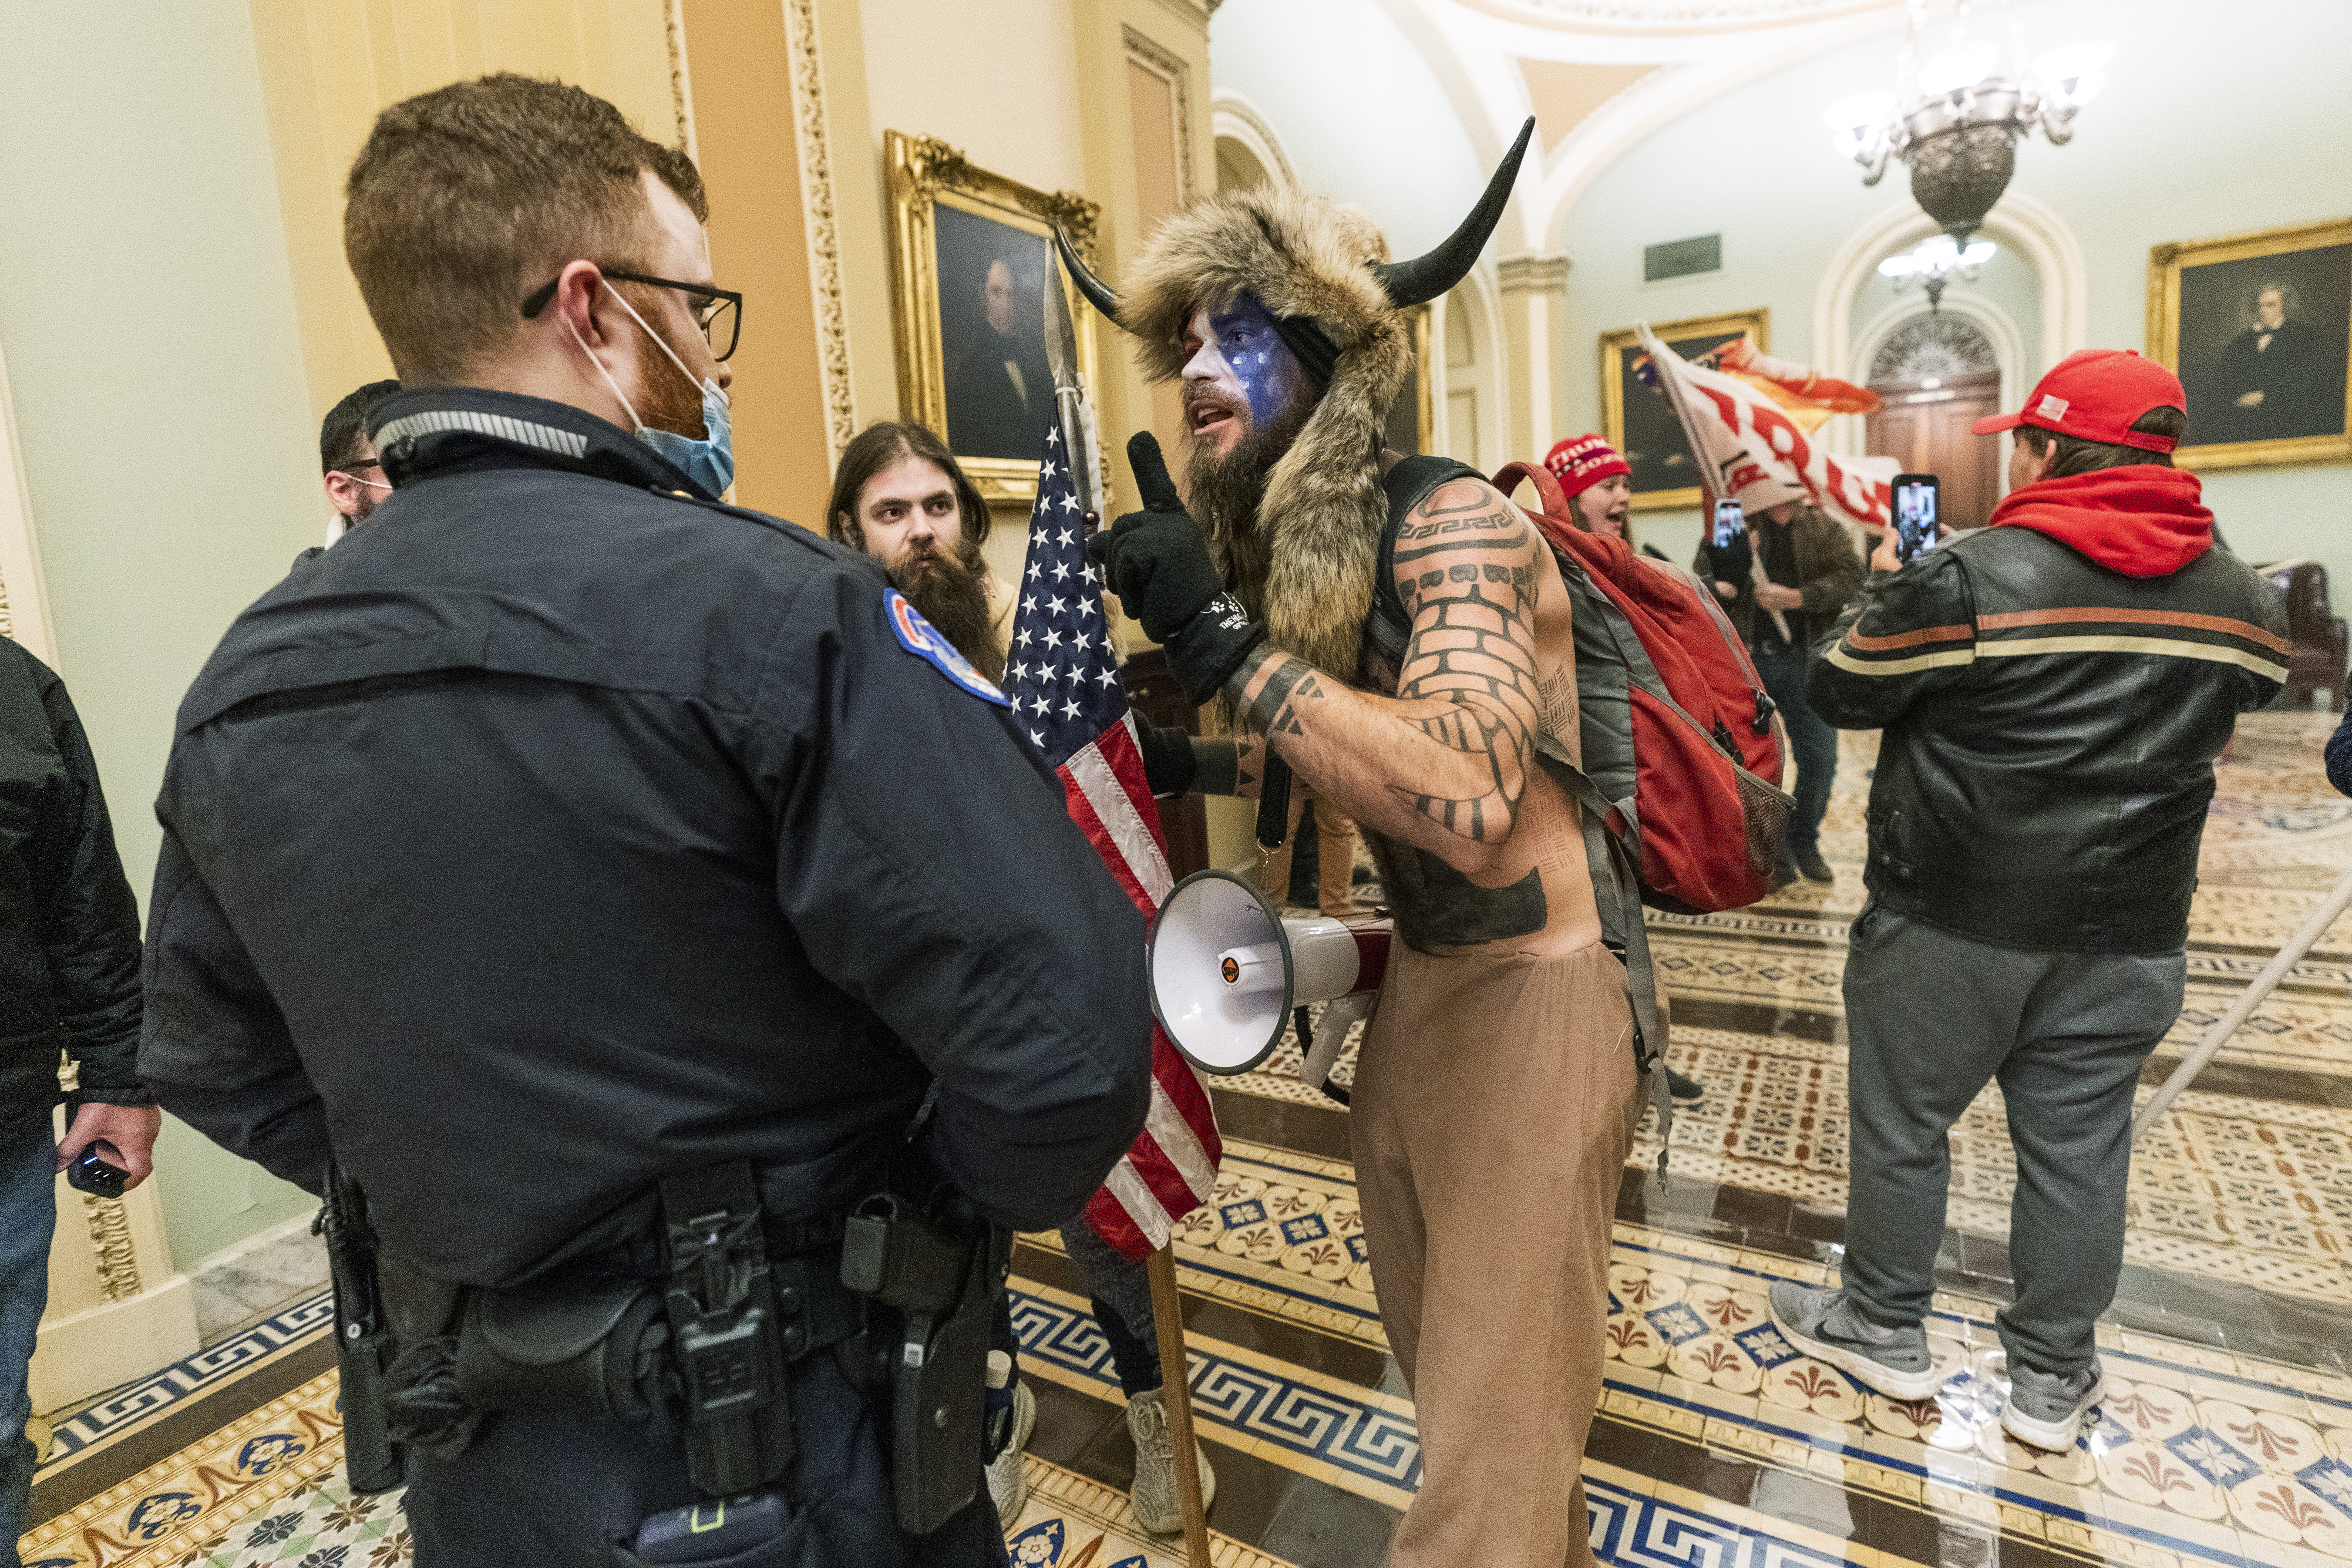 FILE - In this Jan. 6, 2021, file photo supporters of President Donald Trump are confronted by U.S. Capitol Police officers outside the Senate Chamber inside the Capitol in Washington. An Arizona man seen in photos and video of the mob wearing a fur hat with horns was also charged Saturday in Wednesday's chaos. Jacob Anthony Chansley, who also goes by the name Jake Angeli, was taken into custody Saturday, Jan. 9. Photo: AP